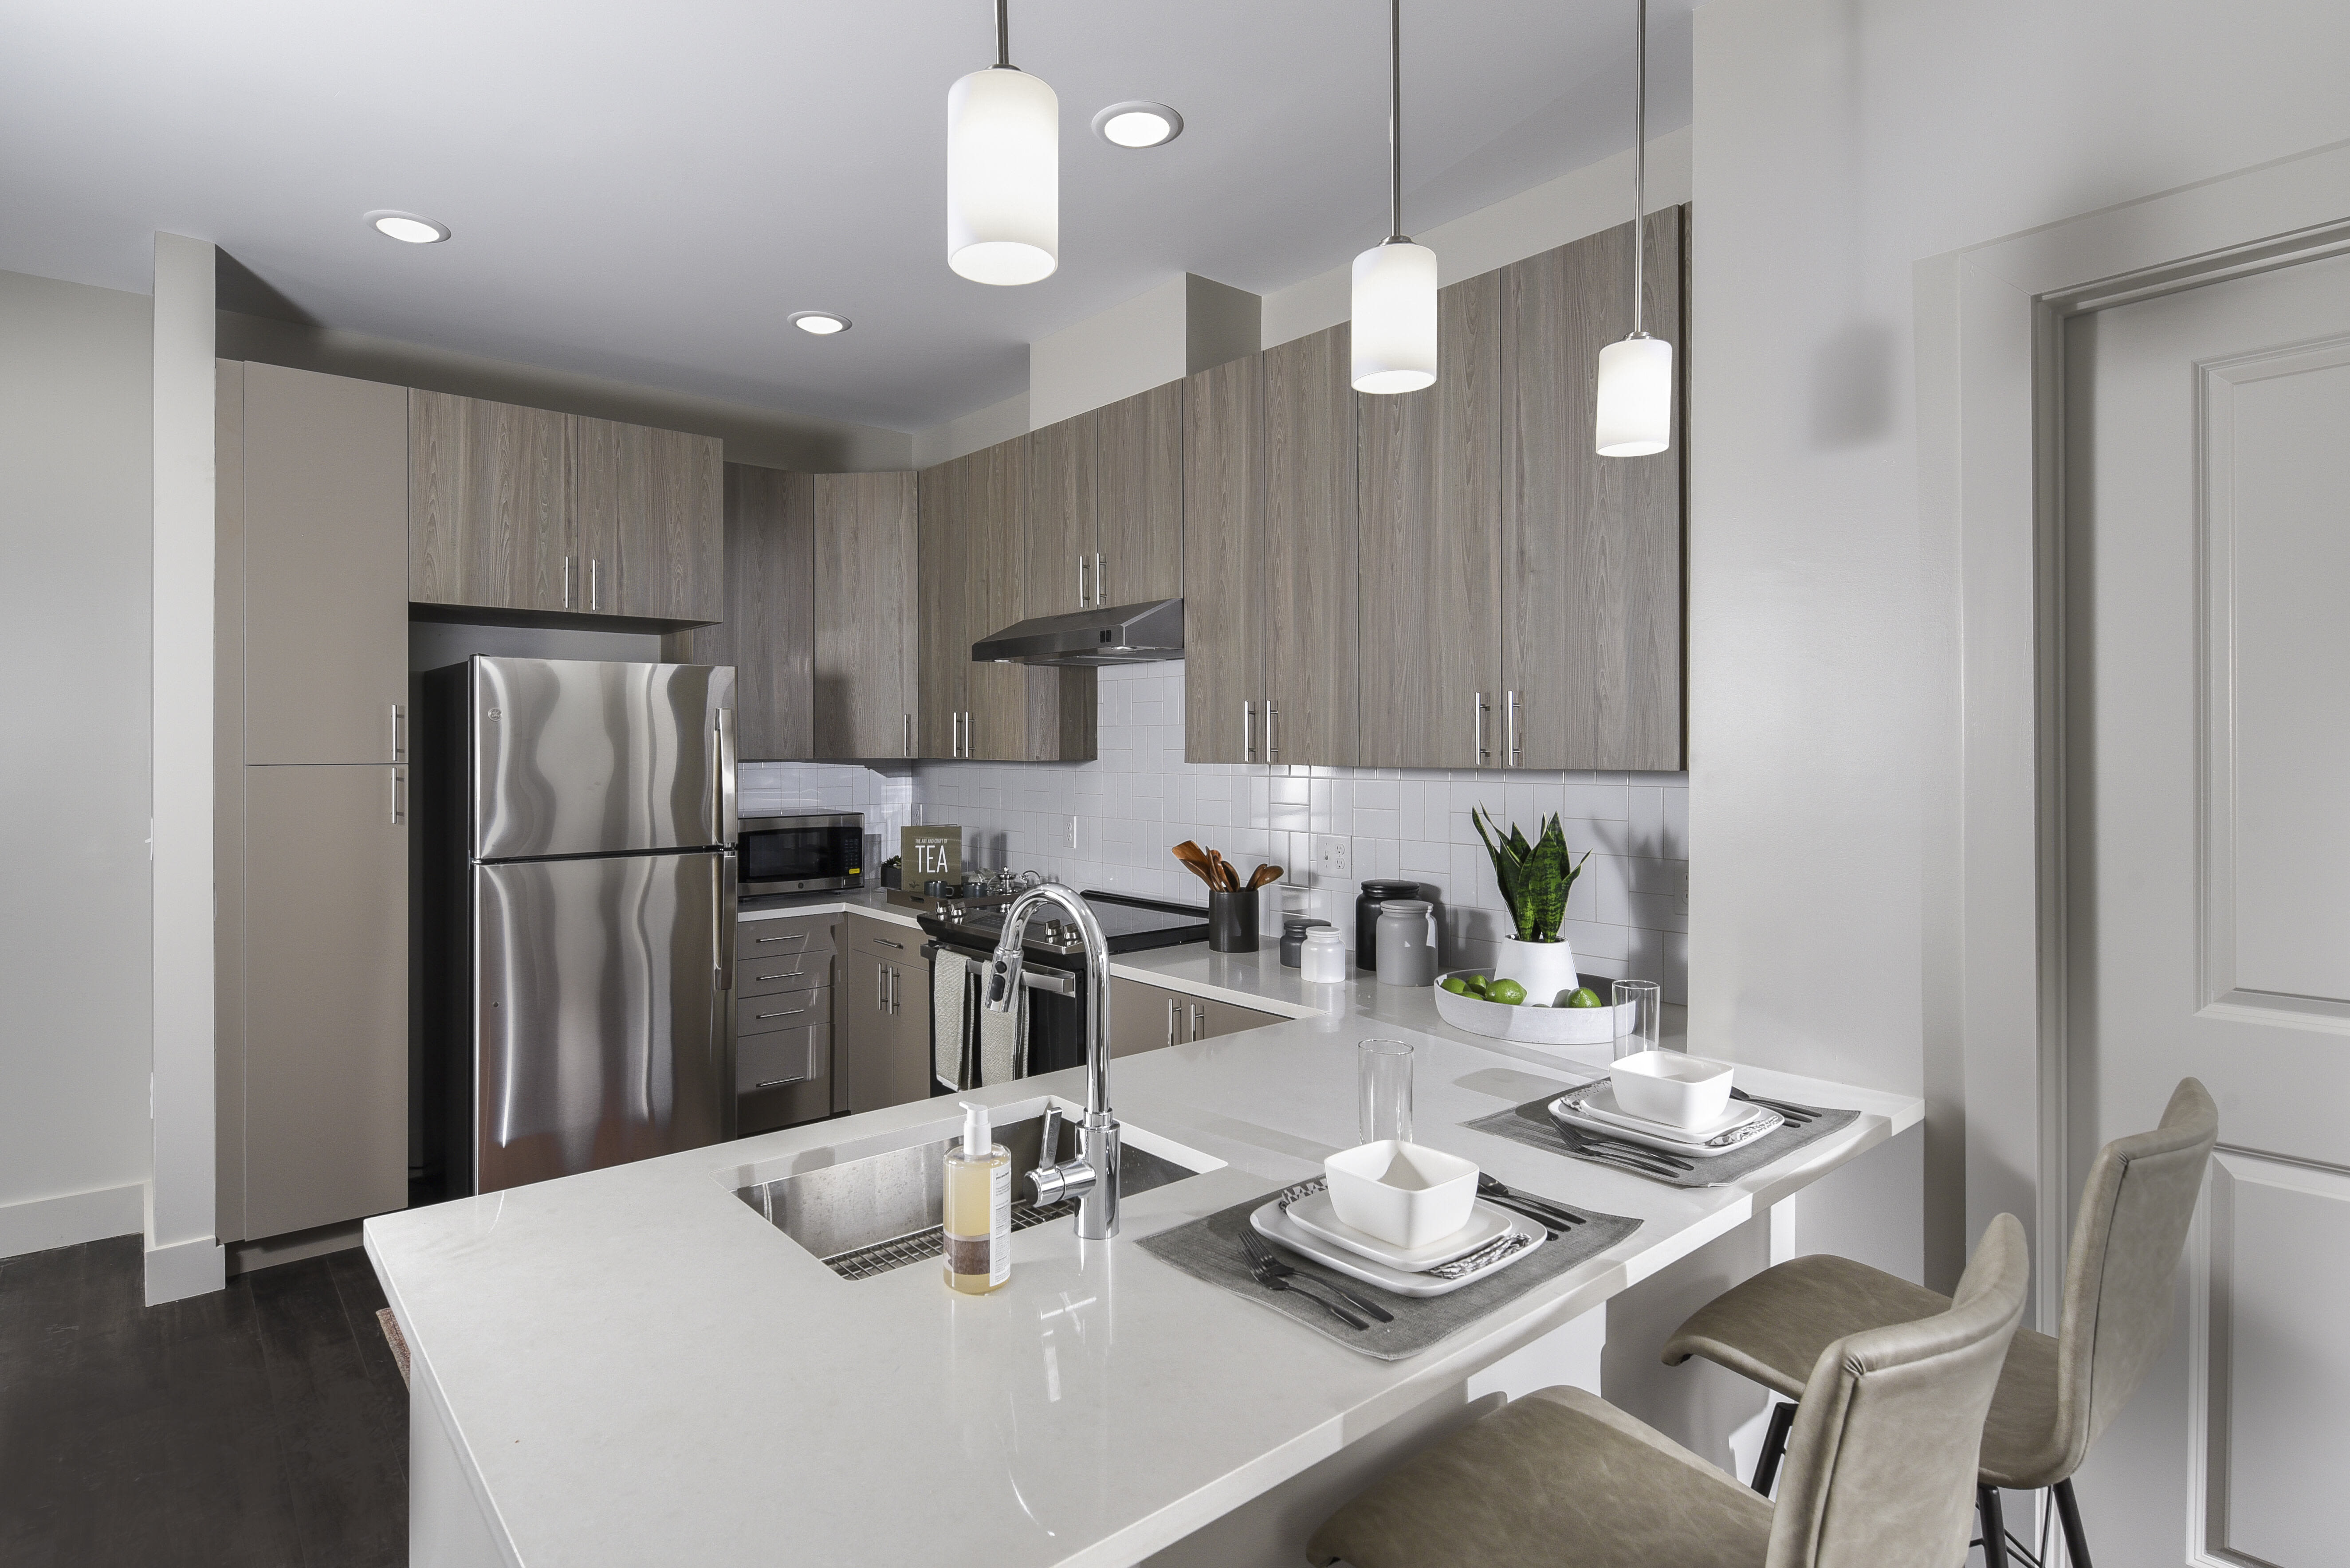 Upgraded kitchen at SilverLake in Belleville, New Jersey